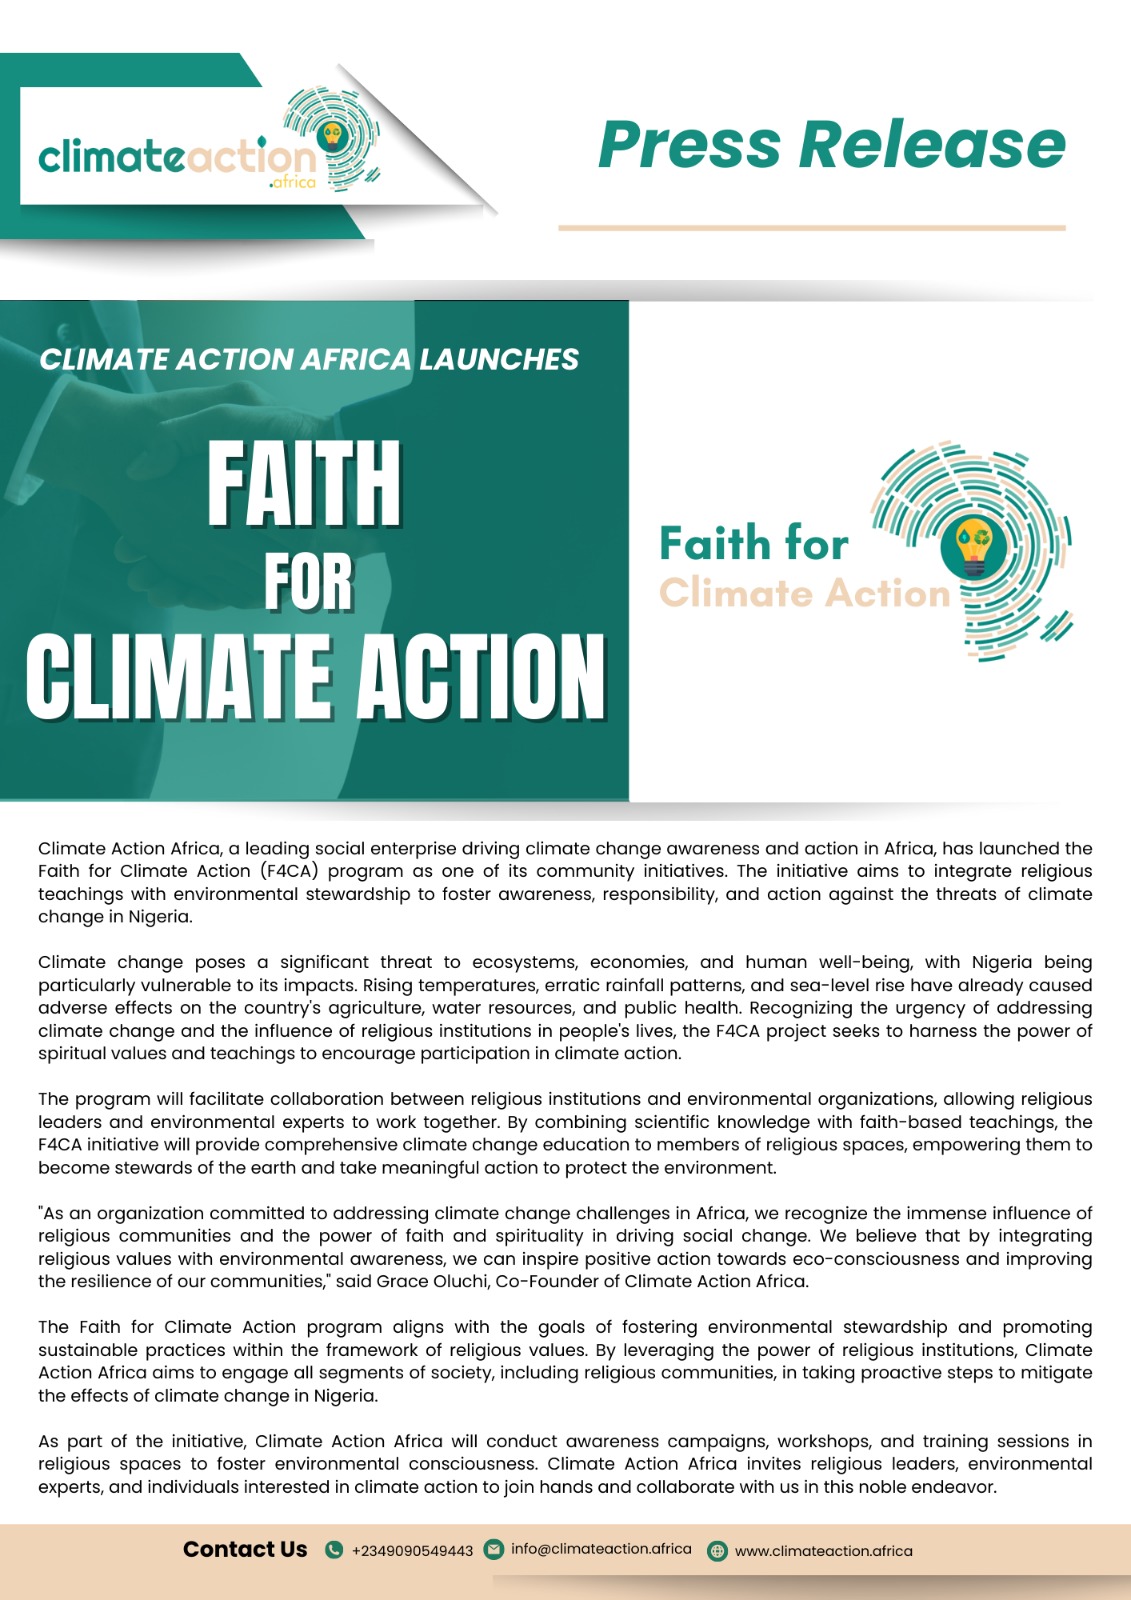 Climate Action Africa Launches Faith for Climate Action (F4CA) to Foster Eco-Consciousness in Nigerian and African Religious Institutions